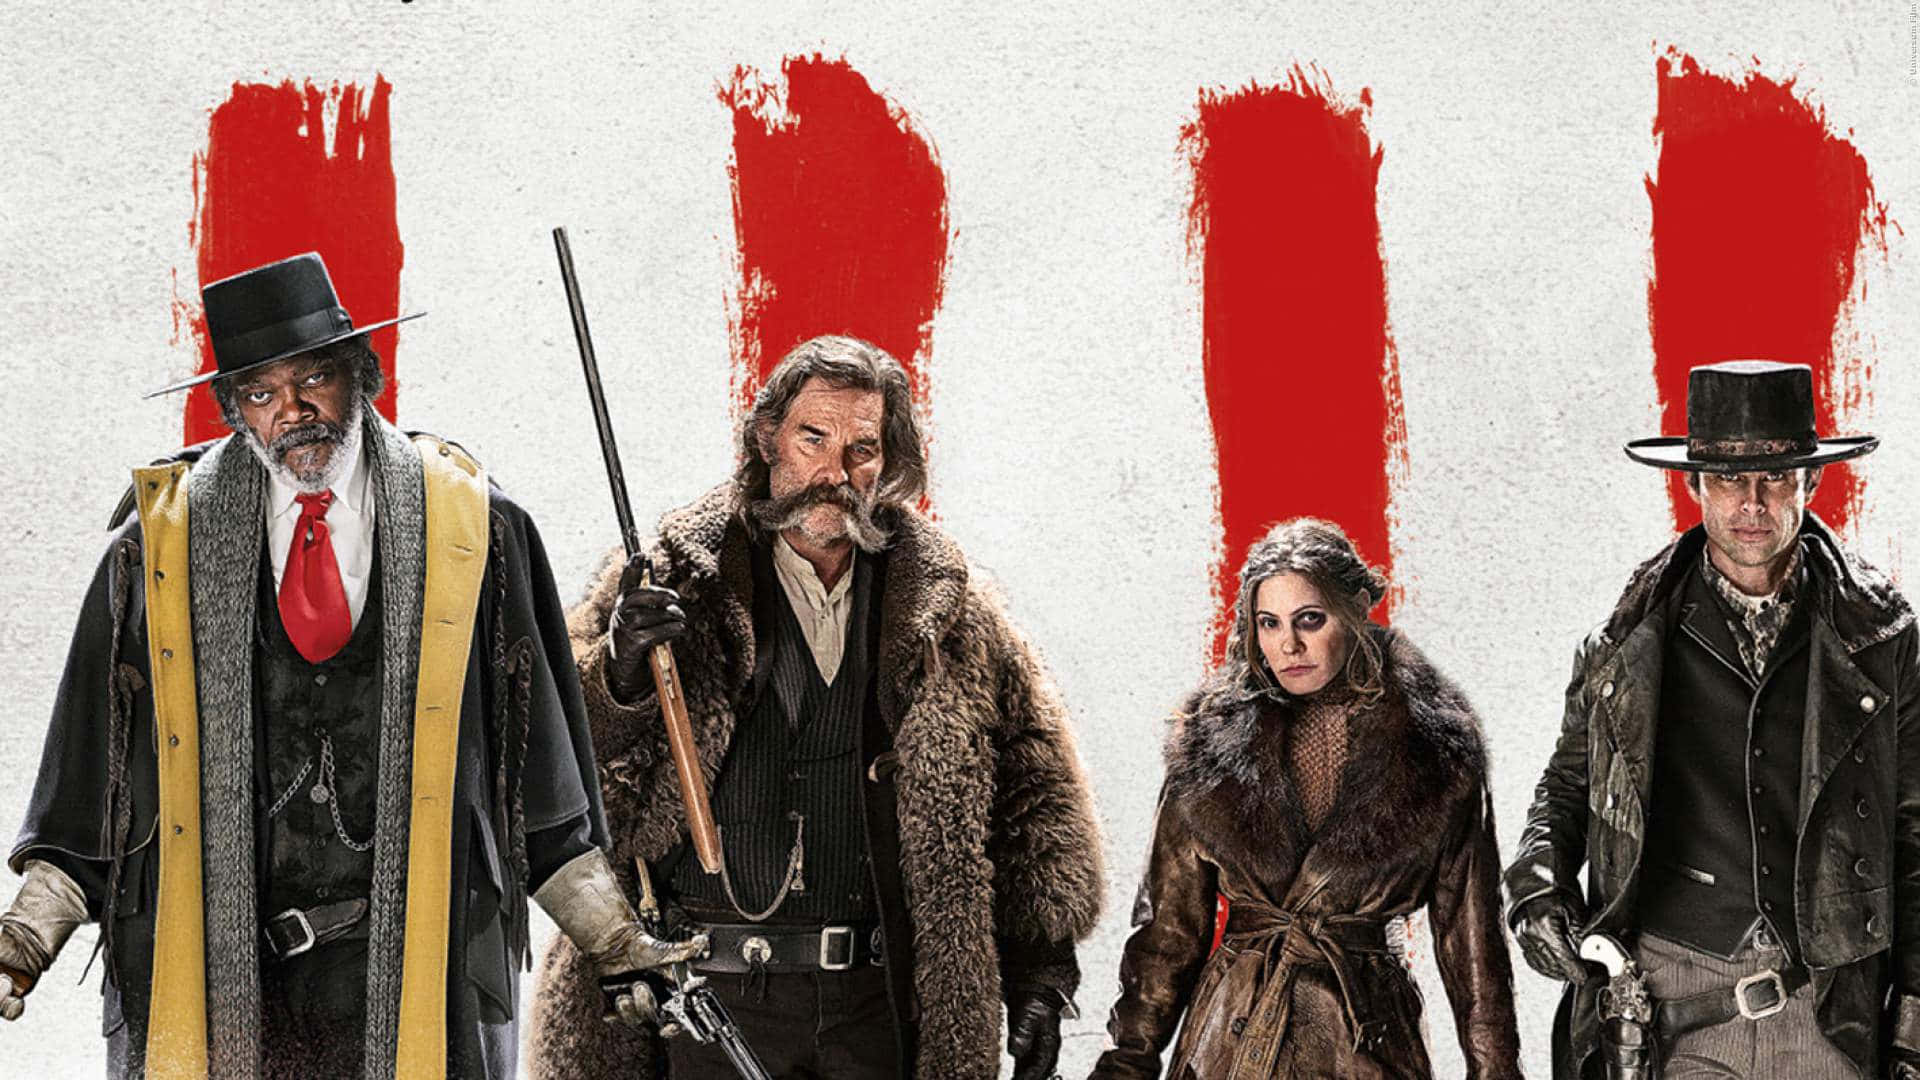 The Hateful Eight Gather In A Snowy Environment. Wallpaper